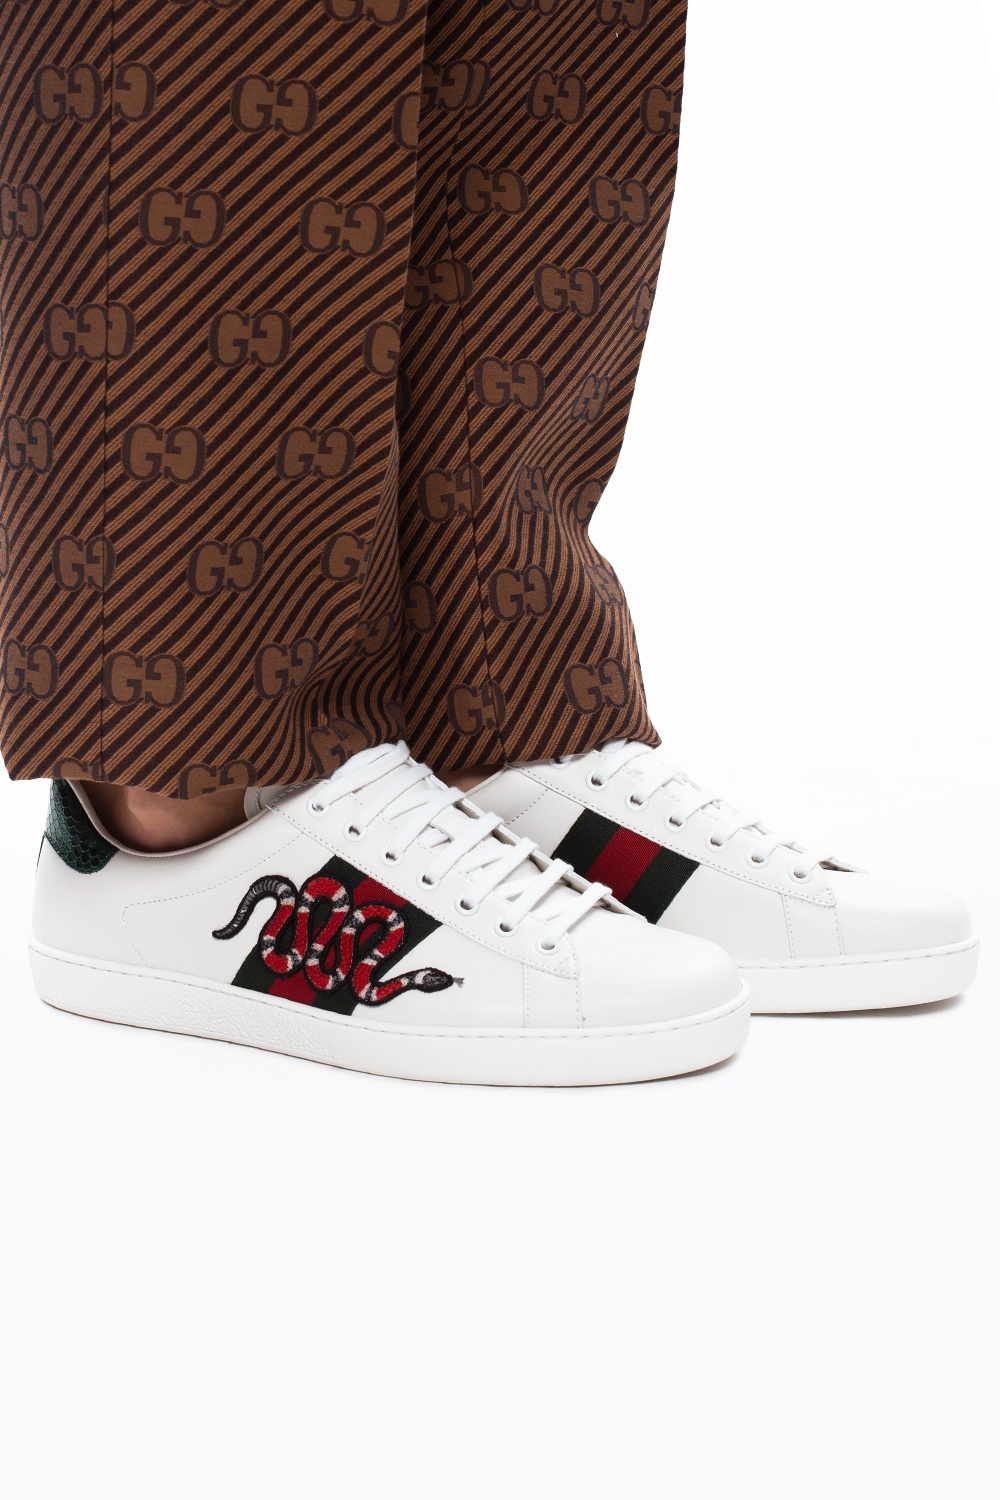 Shop Gucci Snake Ace Embroidered Leather Sneakers With Express Delivery  FARFETCH